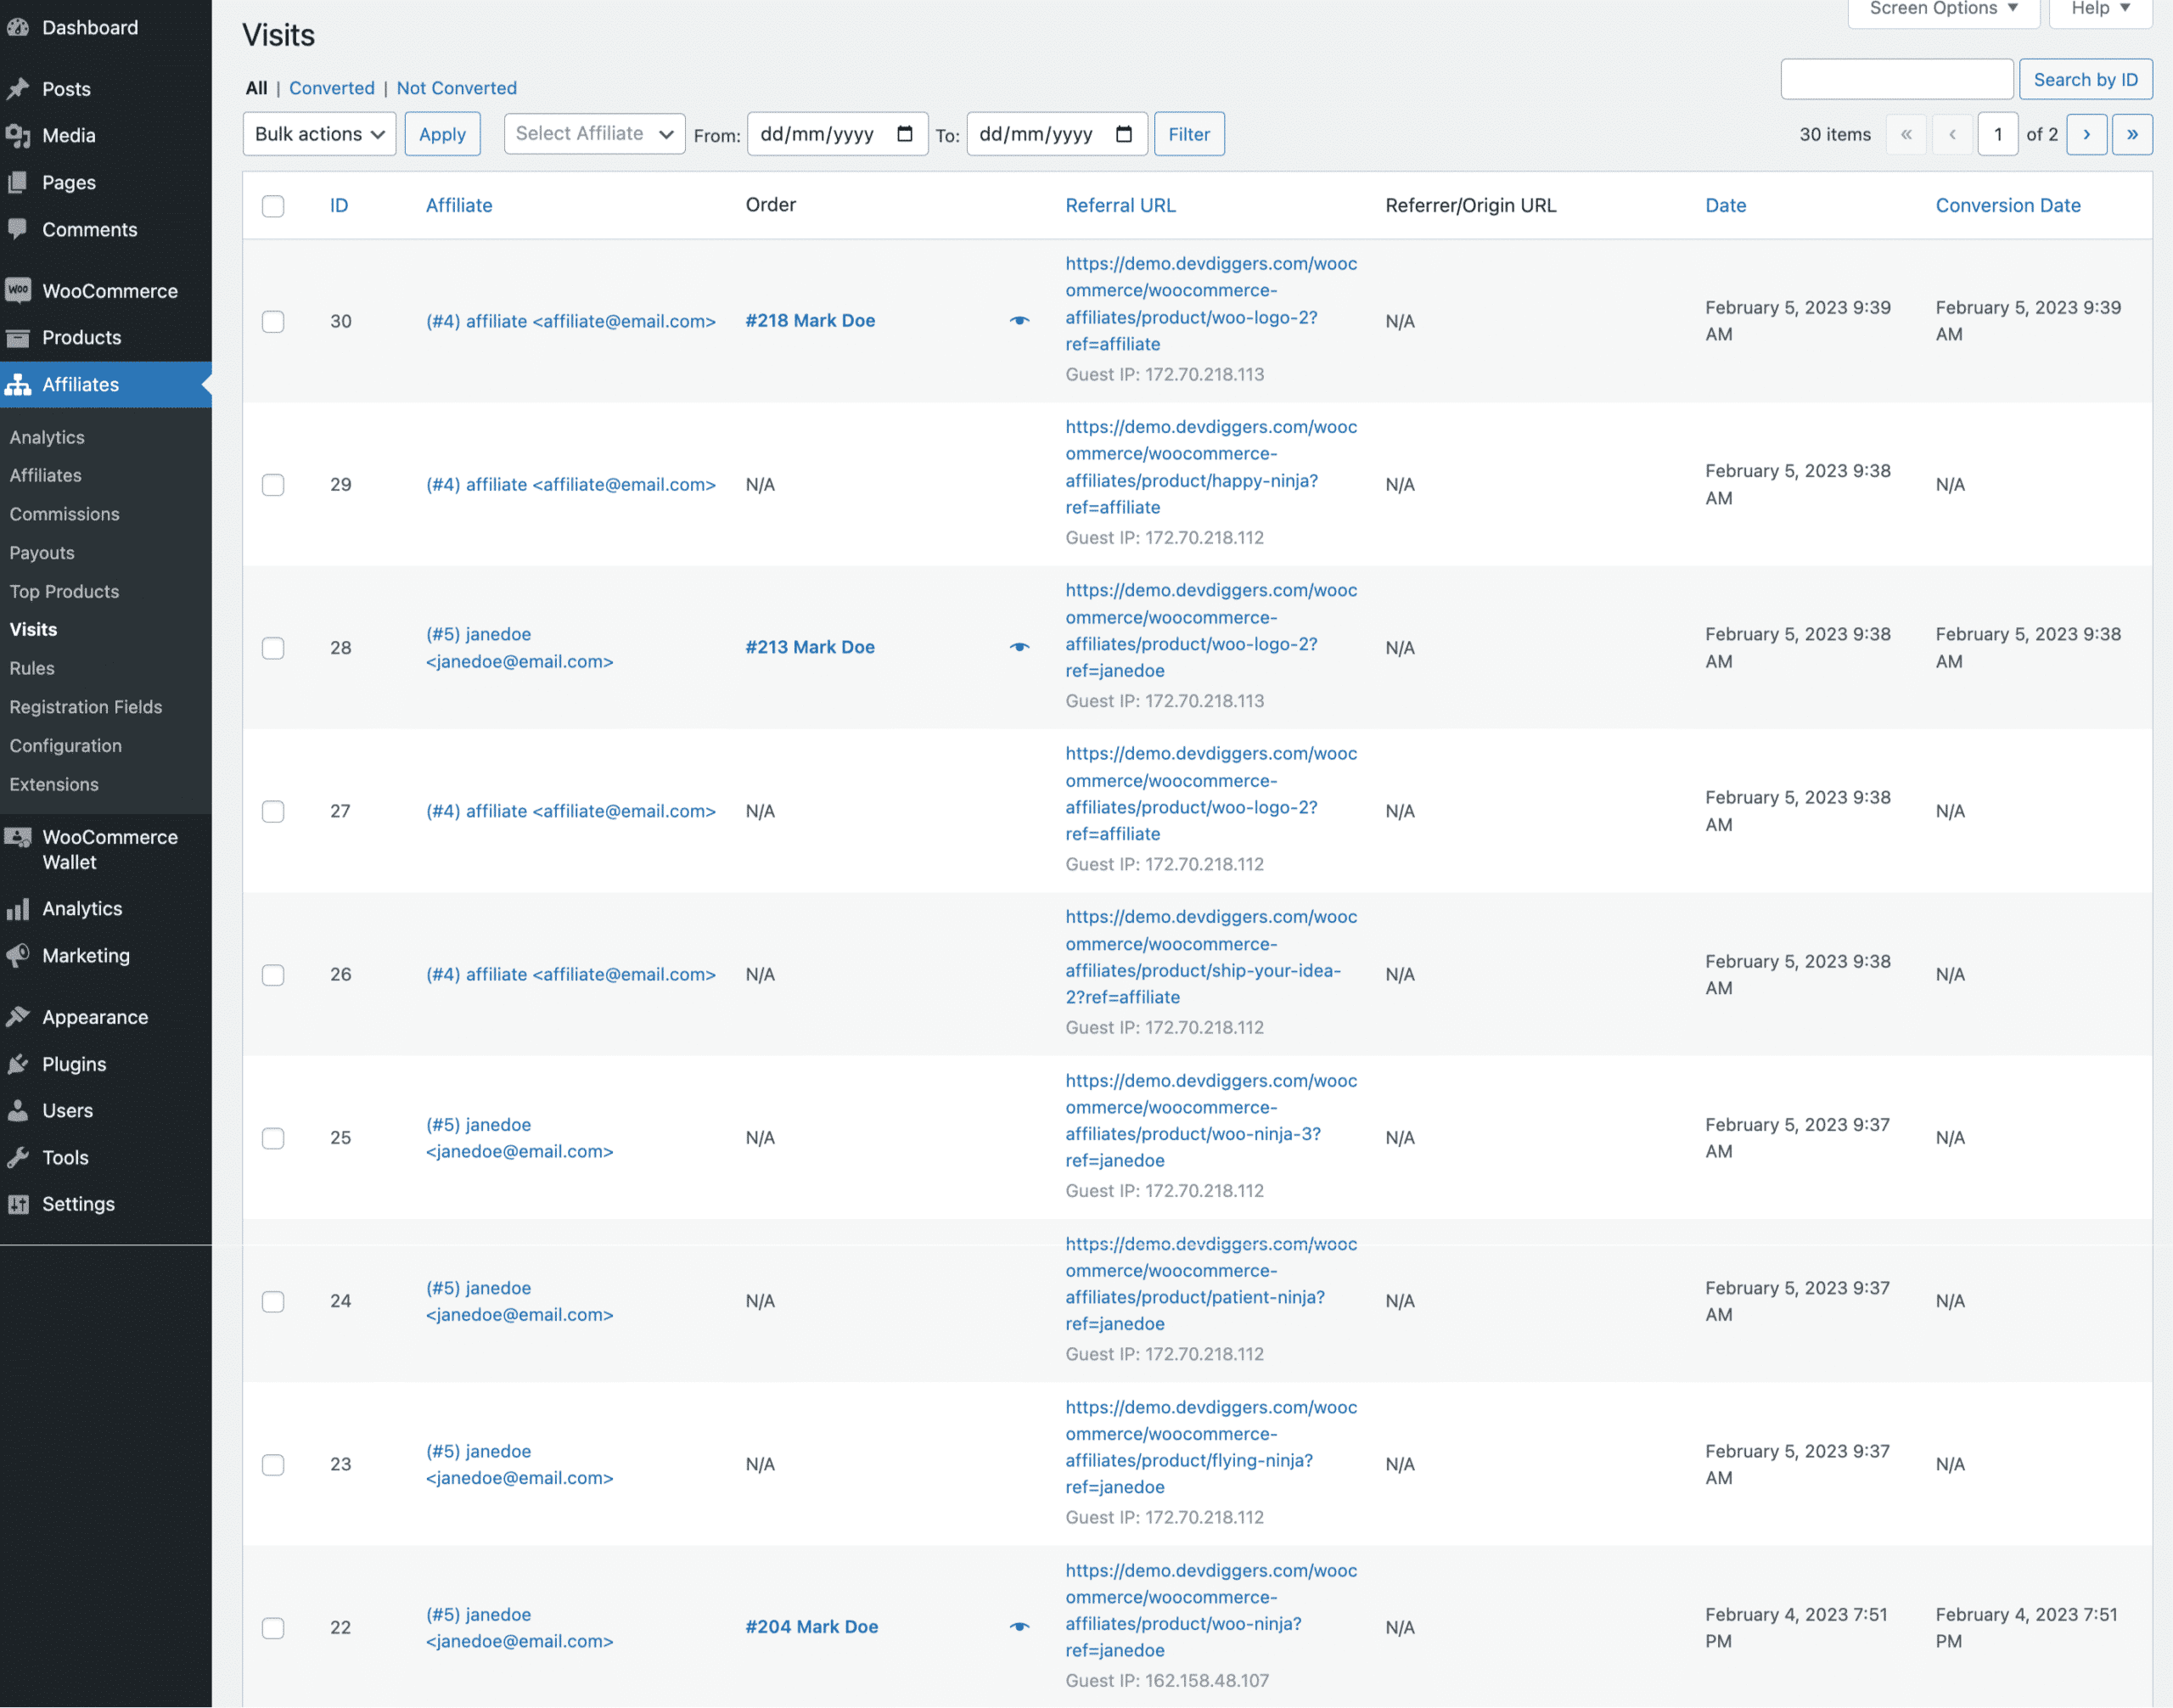 Visits List Page